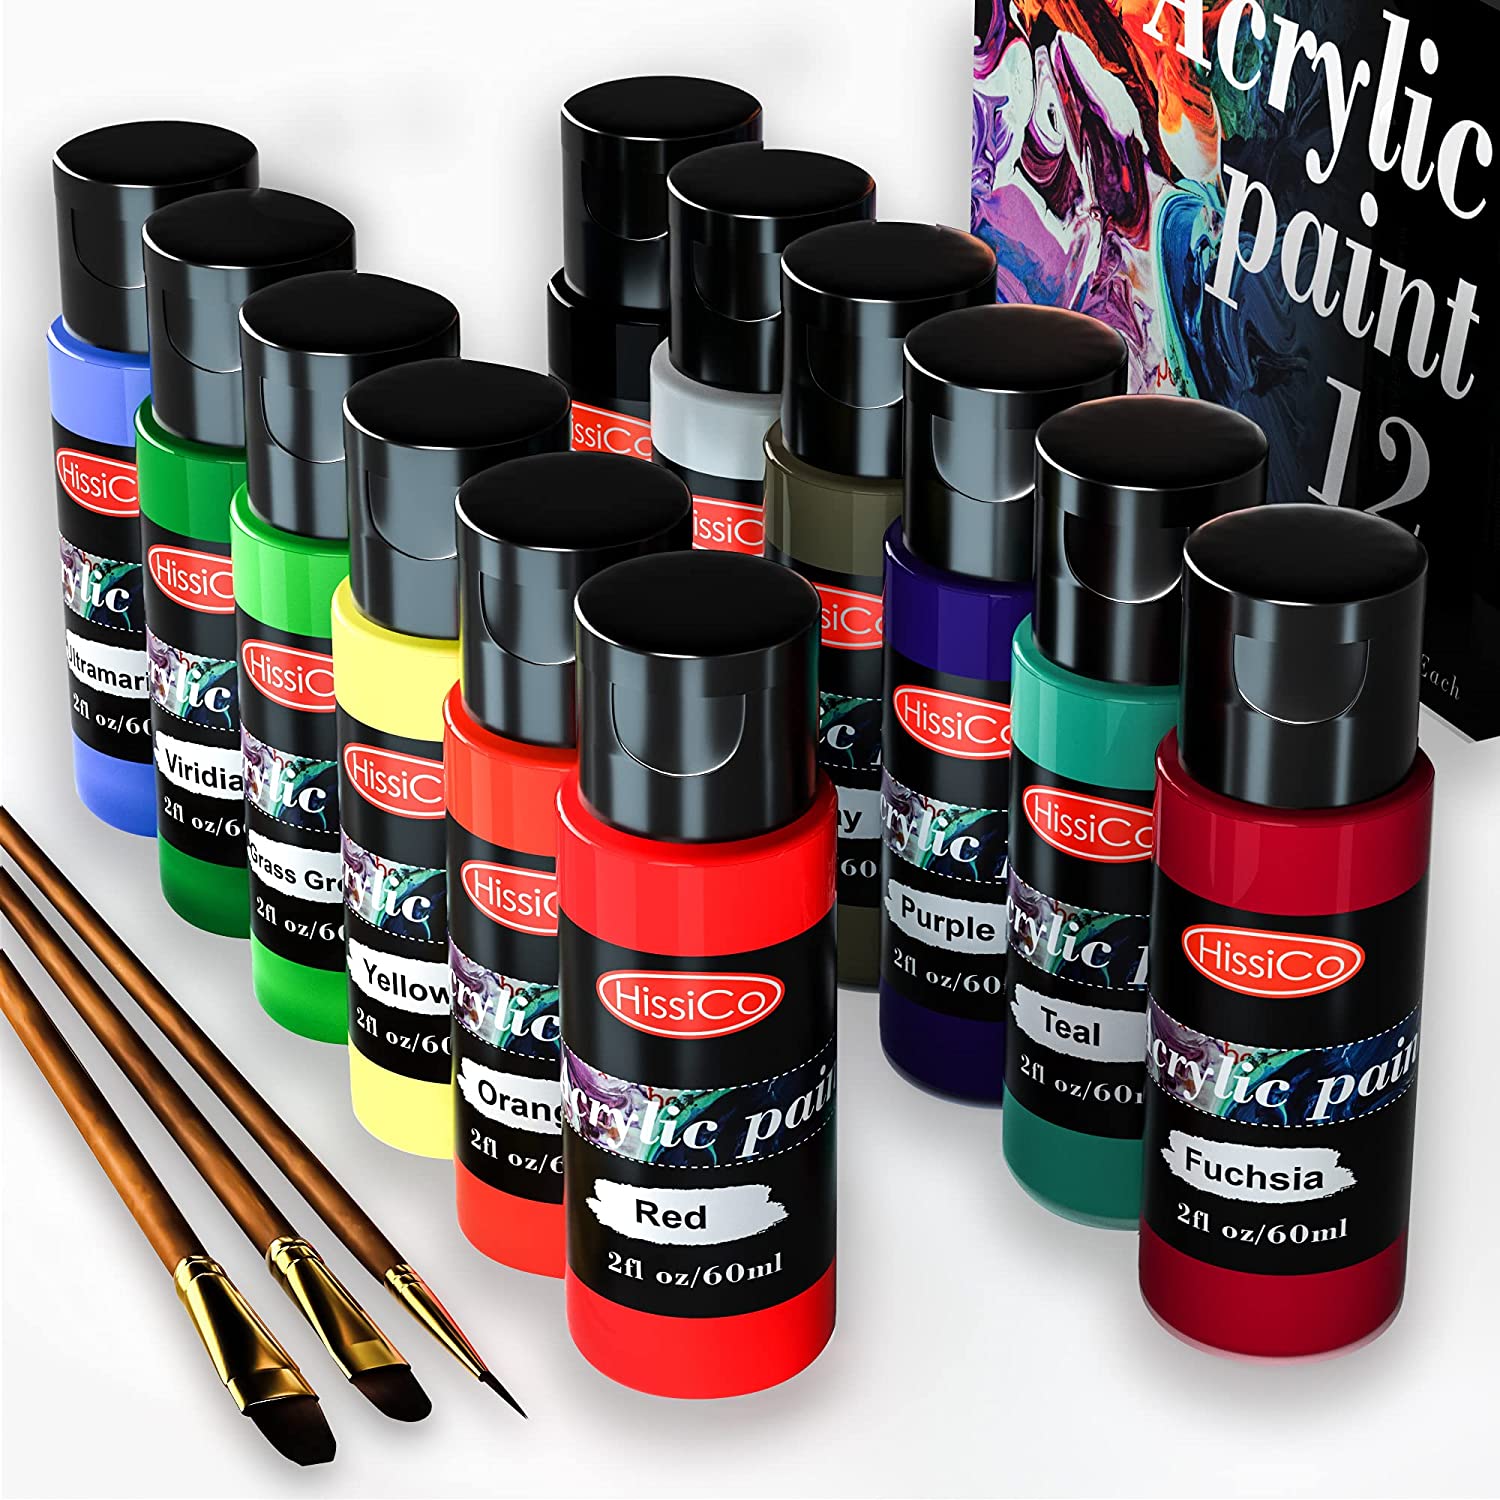 Acrylic Paint Set of 24 Colors 2fl oz 60ml Bottles with 3 Brushes,Non Toxic  24 Colors Acrylic Paint No Fading Rich Pigment for Kids Adults Artists  Canvas Crafts Wood Painting